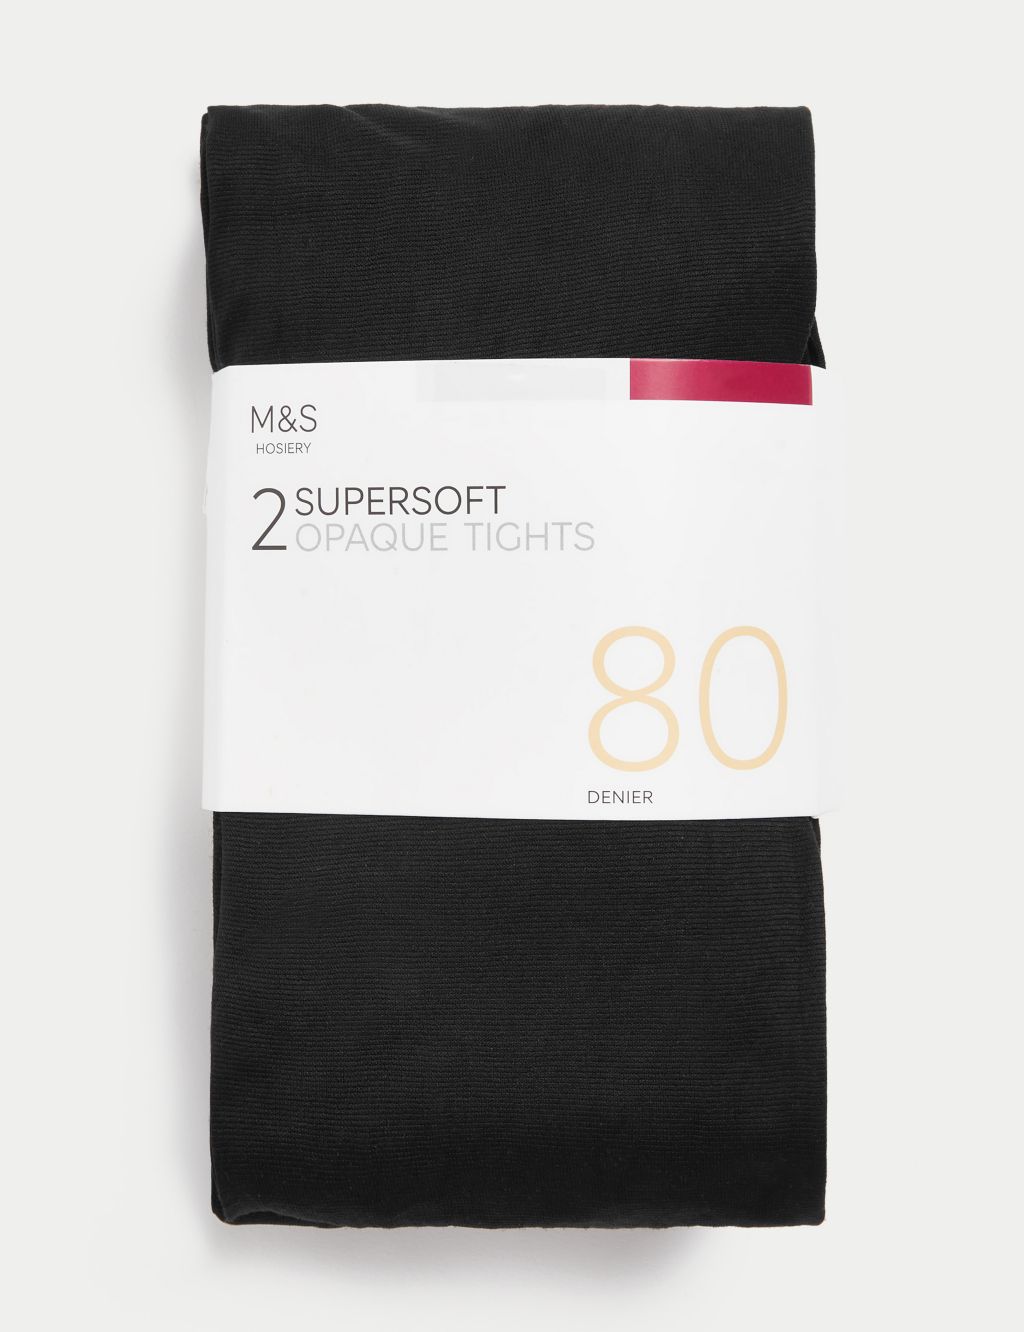 2pk 80 Denier Supersoft Opaque Tights image 2